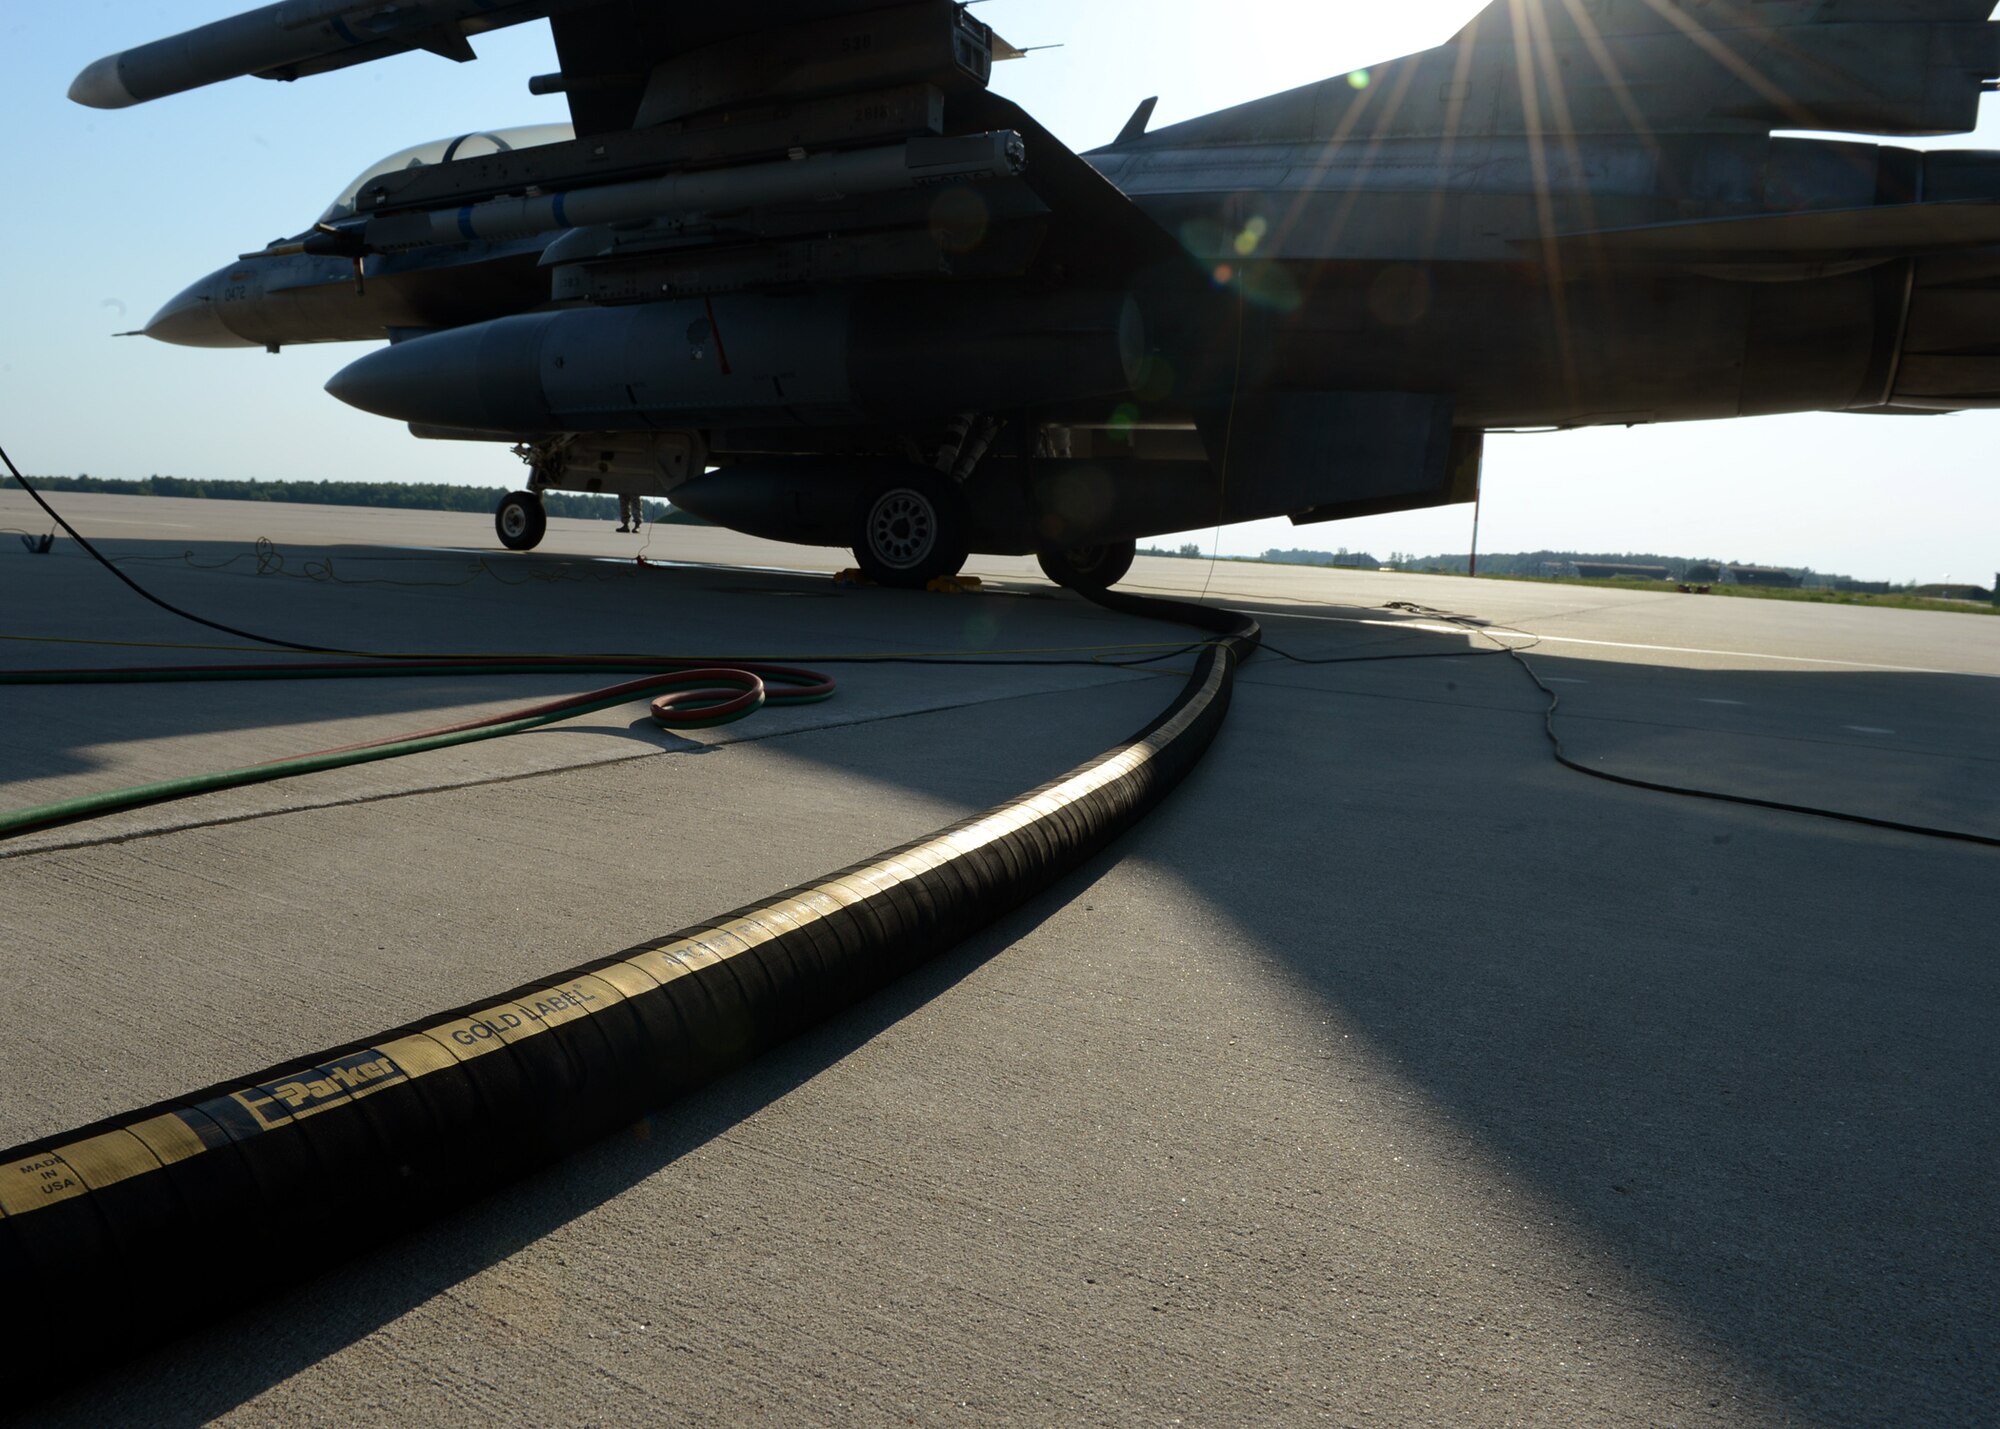 A U.S. Air Force F-16 Fighting Falcon fighter aircraft is refueled at a hot refueling pit after flying a training mission above the skies at Lask Air Base, Poland, June 9, 2014. 18 U.S. F-16 aircraft were a part of the U.S. Aviation Detachment Rotation 14-3 that supported Polish-led Exercise EAGLE TALON and U.S. Navy-led BALTOPS 14. These exercises maximize readiness for real-world operations with NATO allies and maintain a continuous presence in Eastern Europe. (U.S. Air Force photo by Airman 1st Class Kyle Gese/Released)